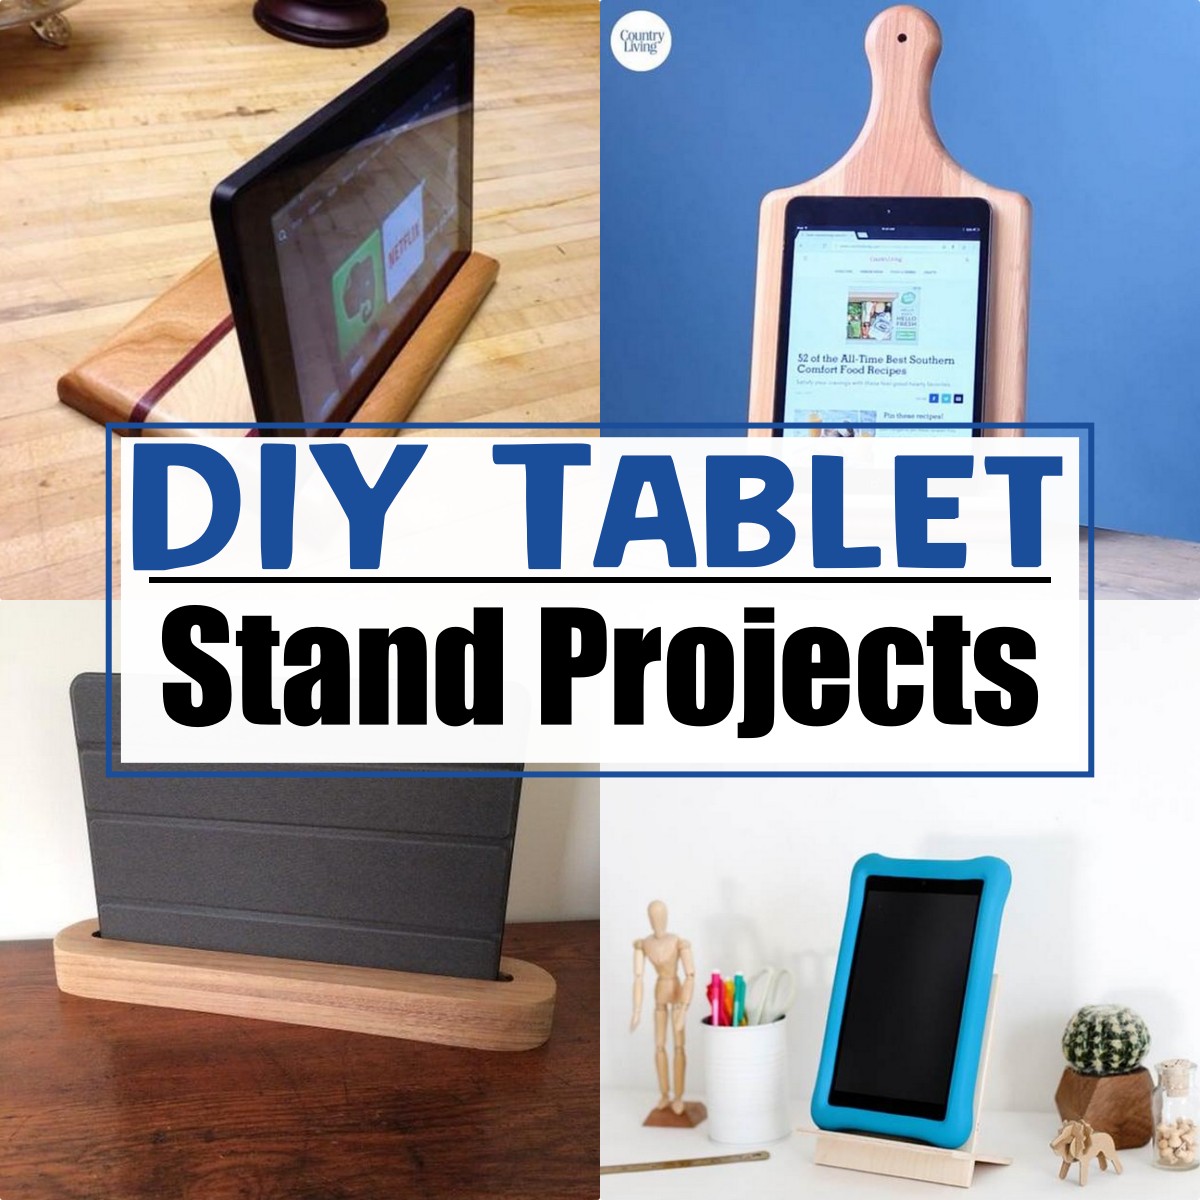 DIY Tablet Stand Projects